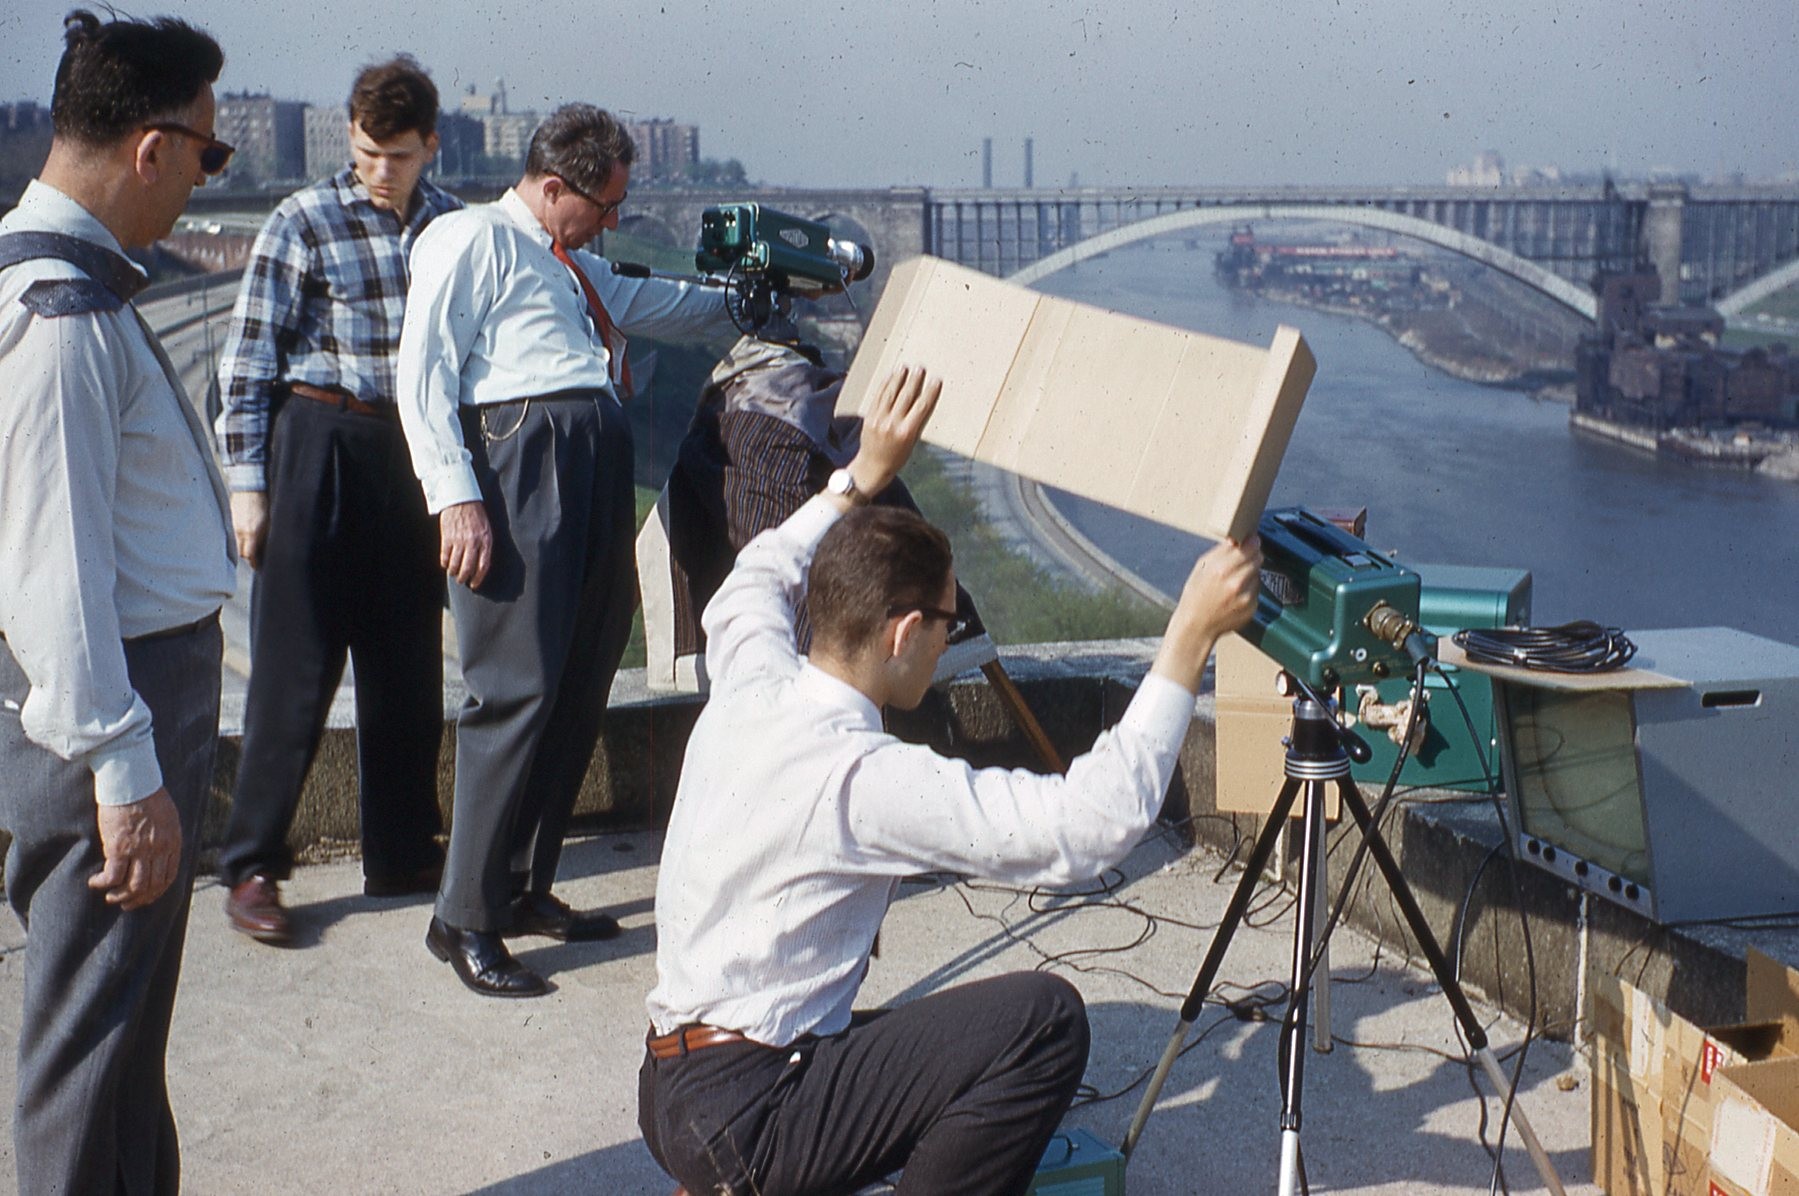 photo of 4 men standing on rooftop looking at TV cameras with river and bridge in distant background